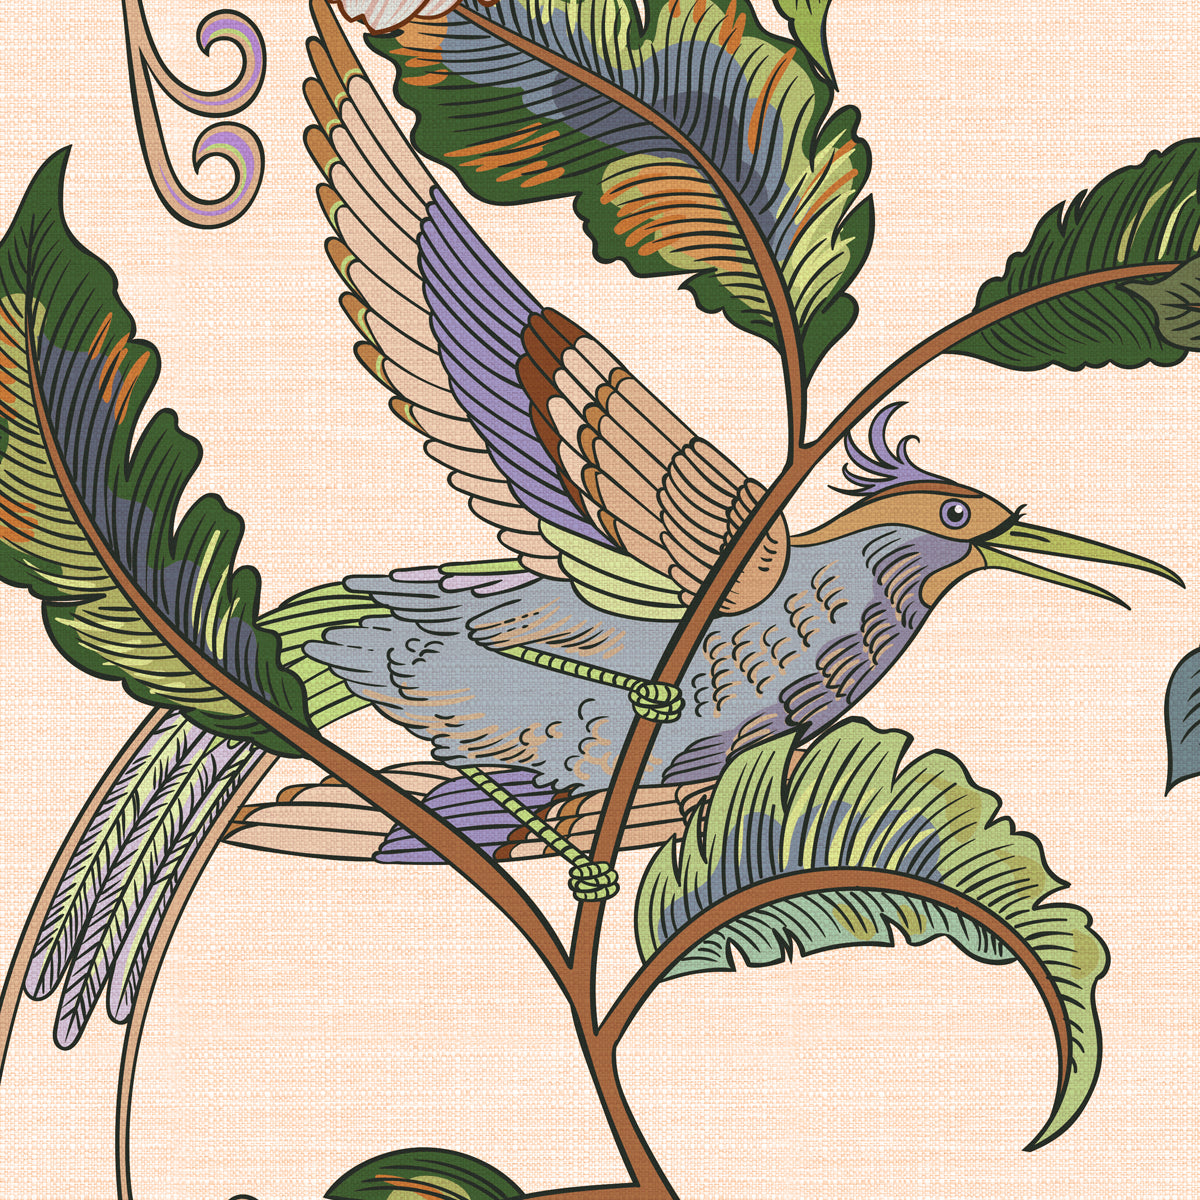 Seamless Tropical, Humming Bird, Floral Customised Wallpaper